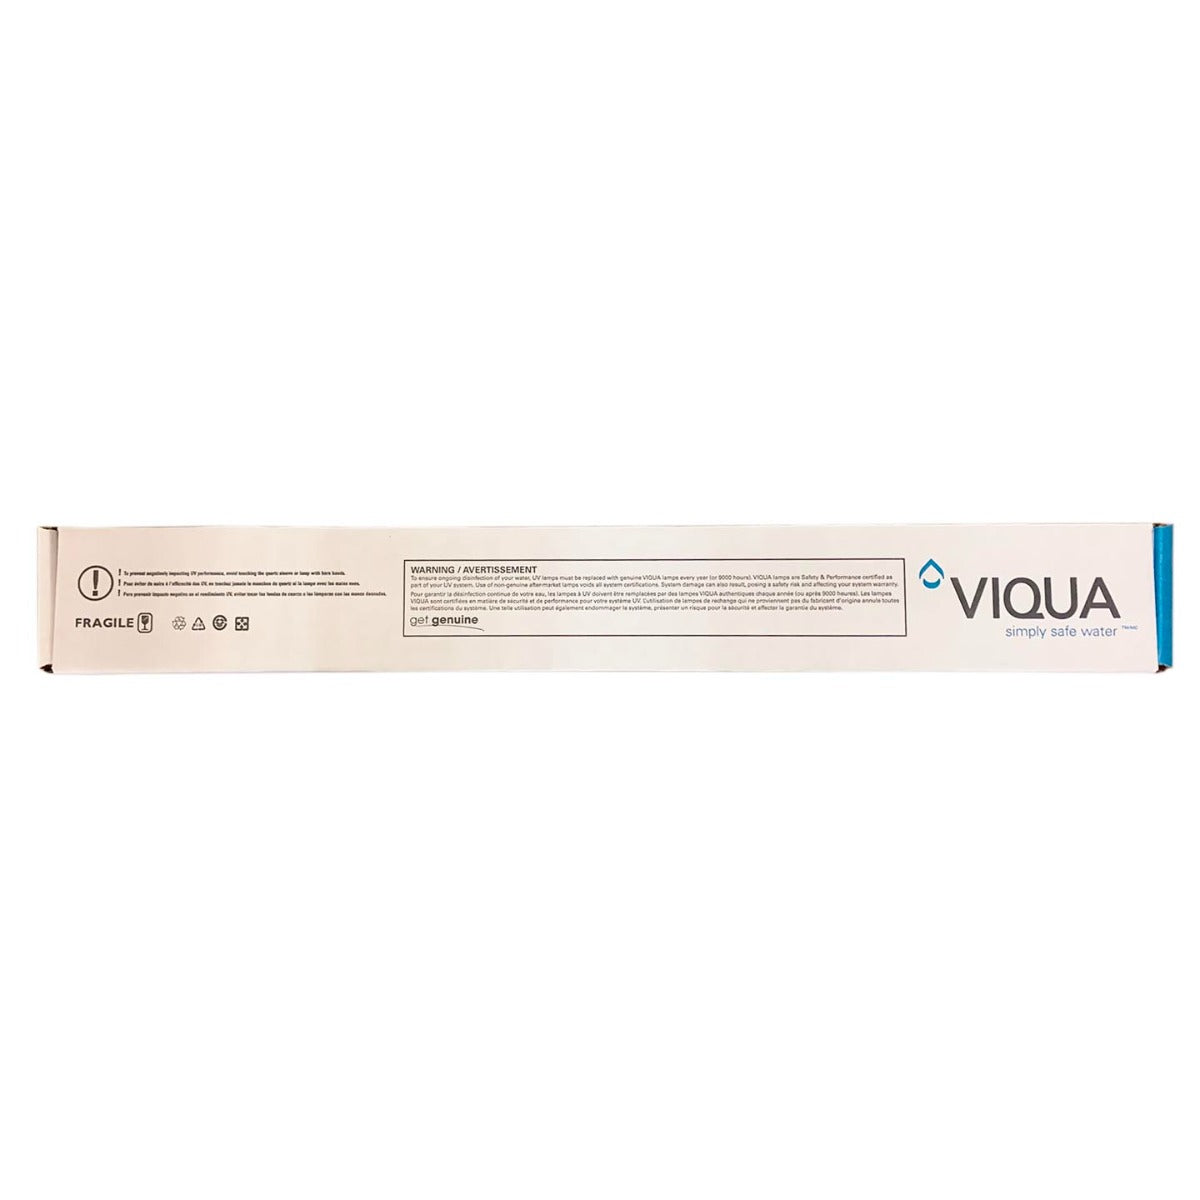 S212RL Viqua Water Disinfection System UV Lamp